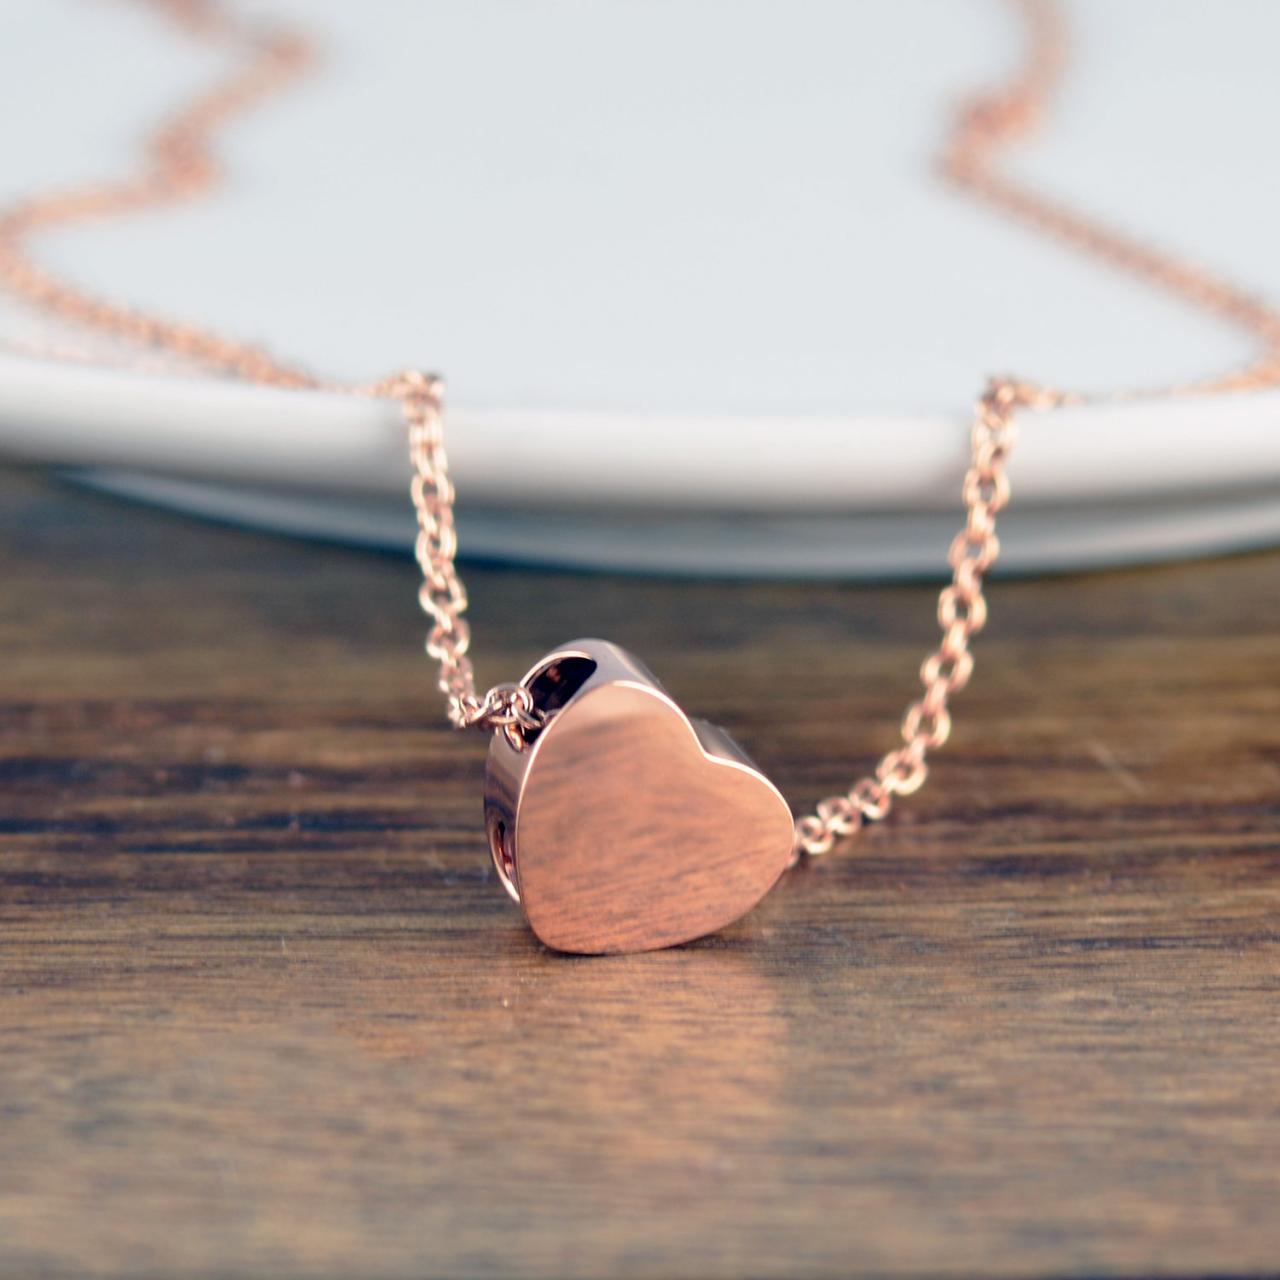 Rose Gold Heart Necklace, Cremation Jewelry, Ash Jewelry, Heart Cremation Pendant, Urn Necklace For Ashes, Cremation Necklace